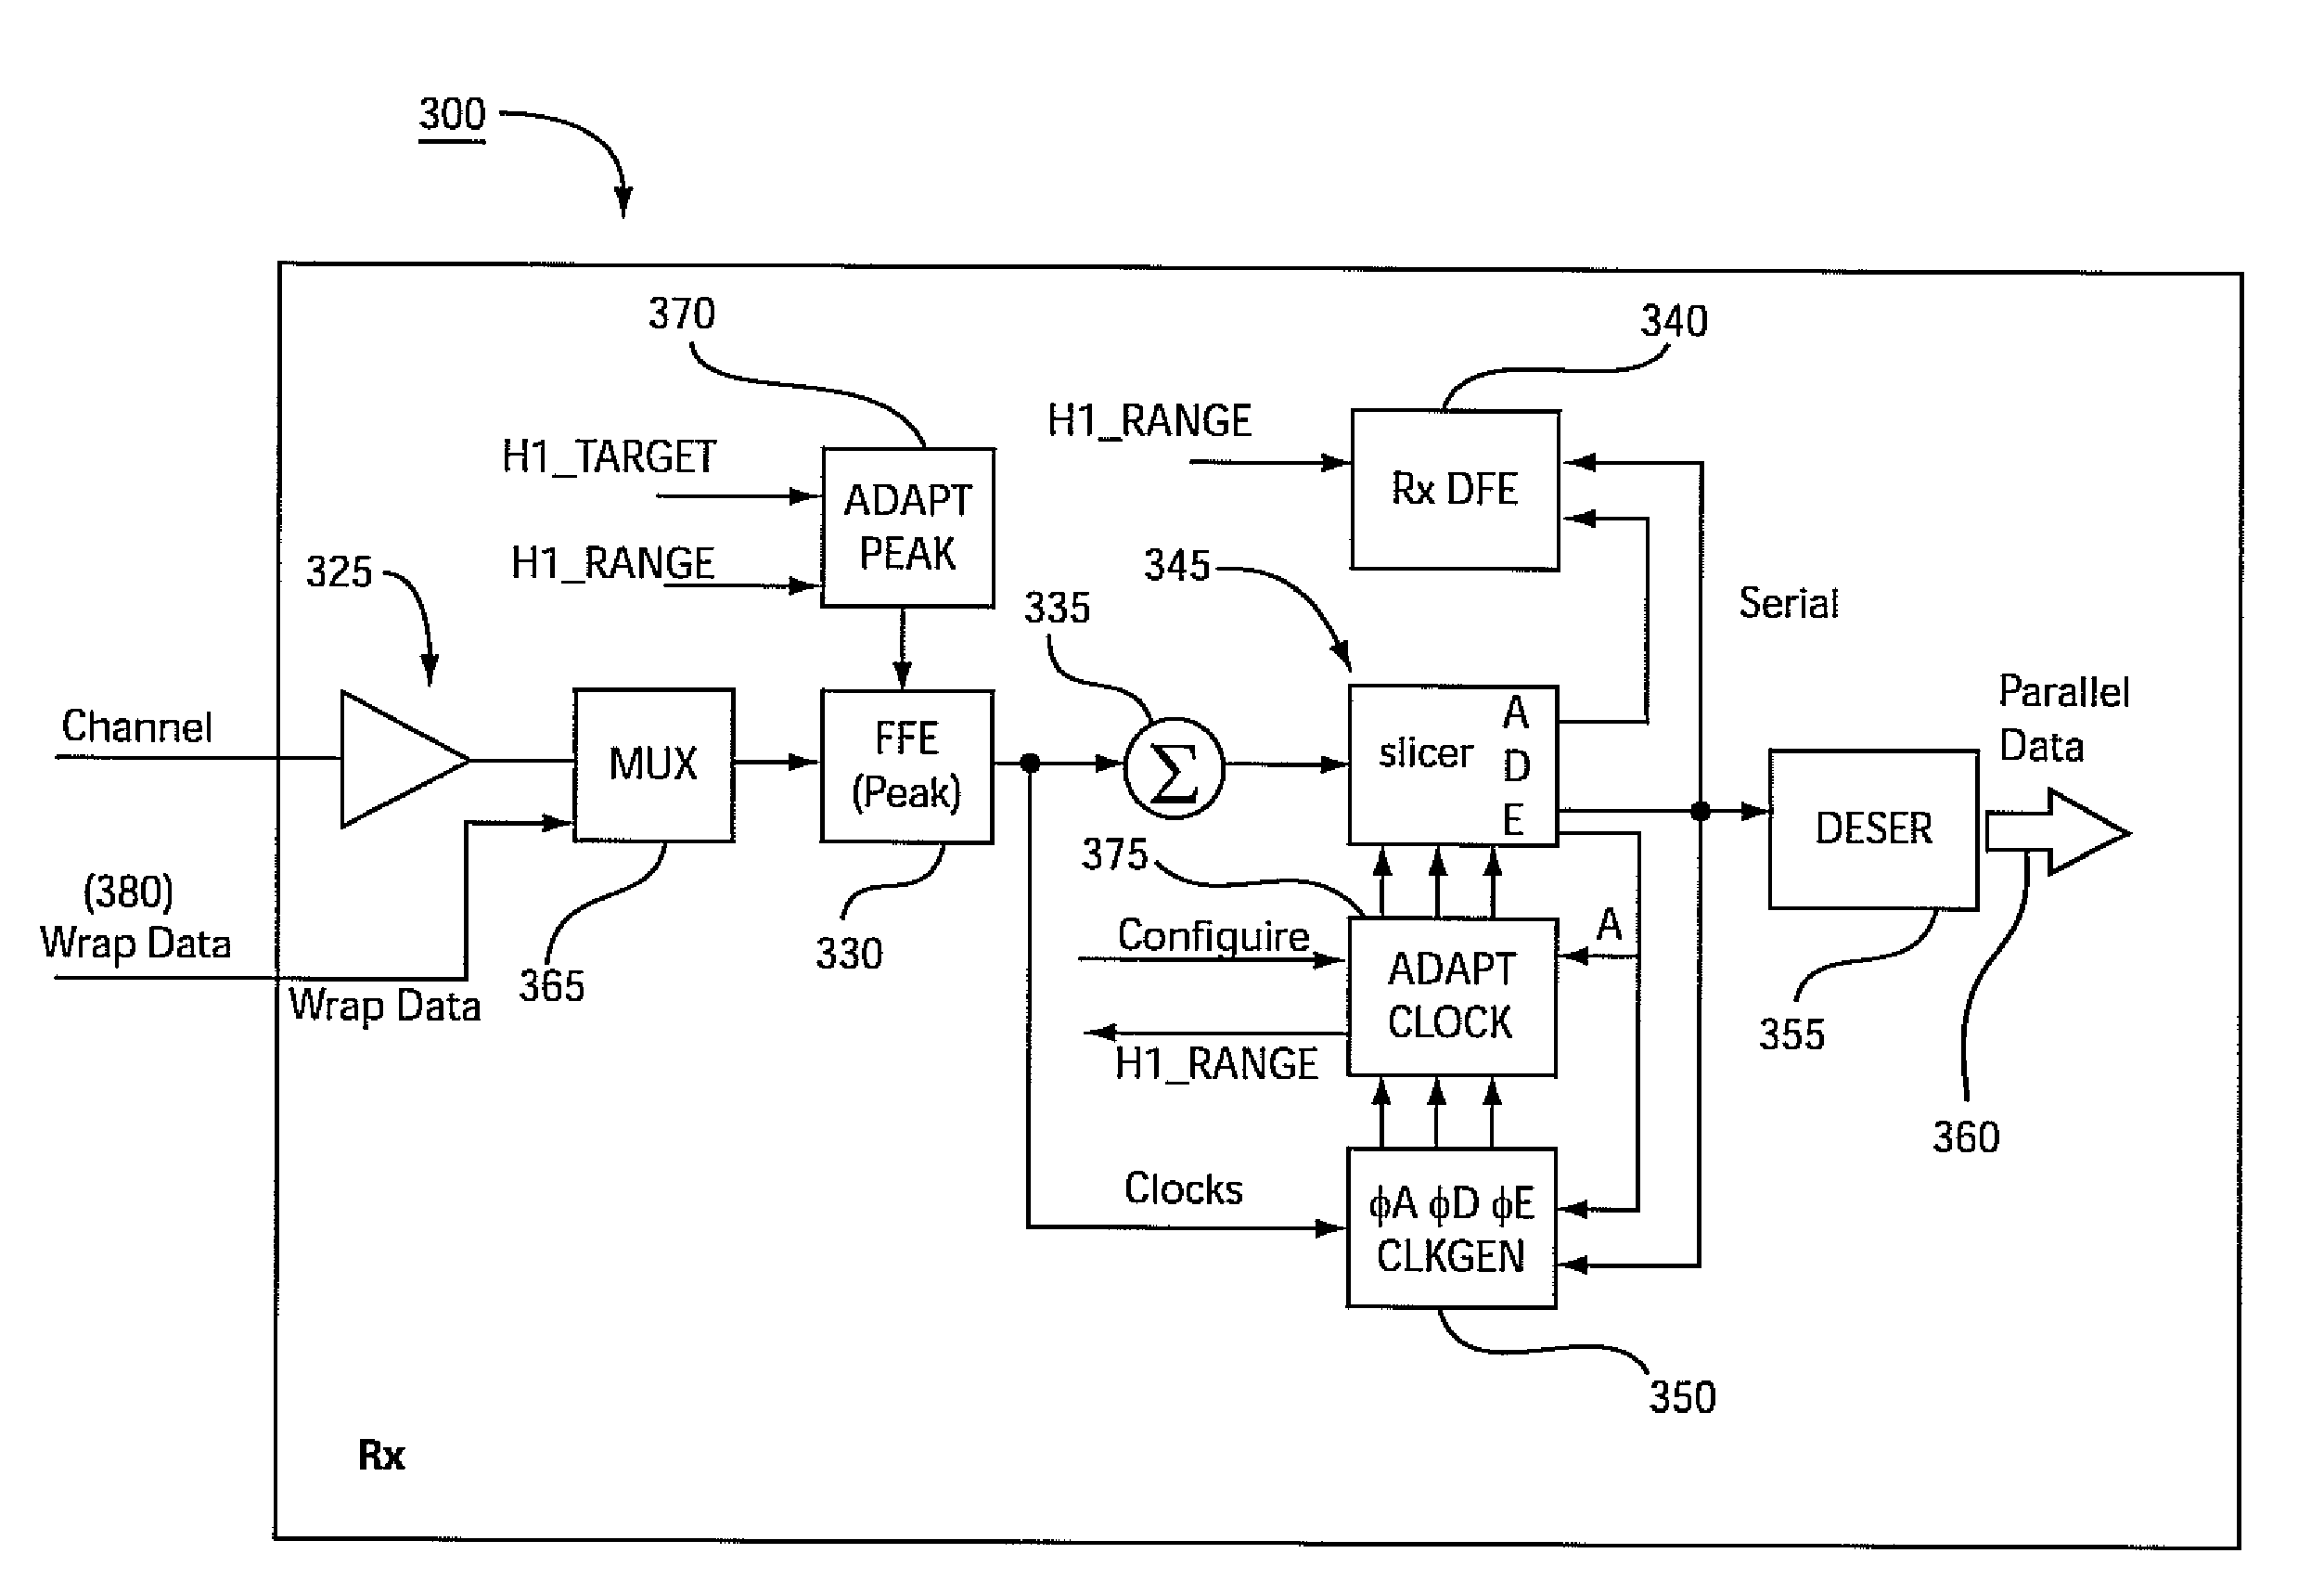 Adaptive clock and equalization control systems and methods for data receivers in communications systems